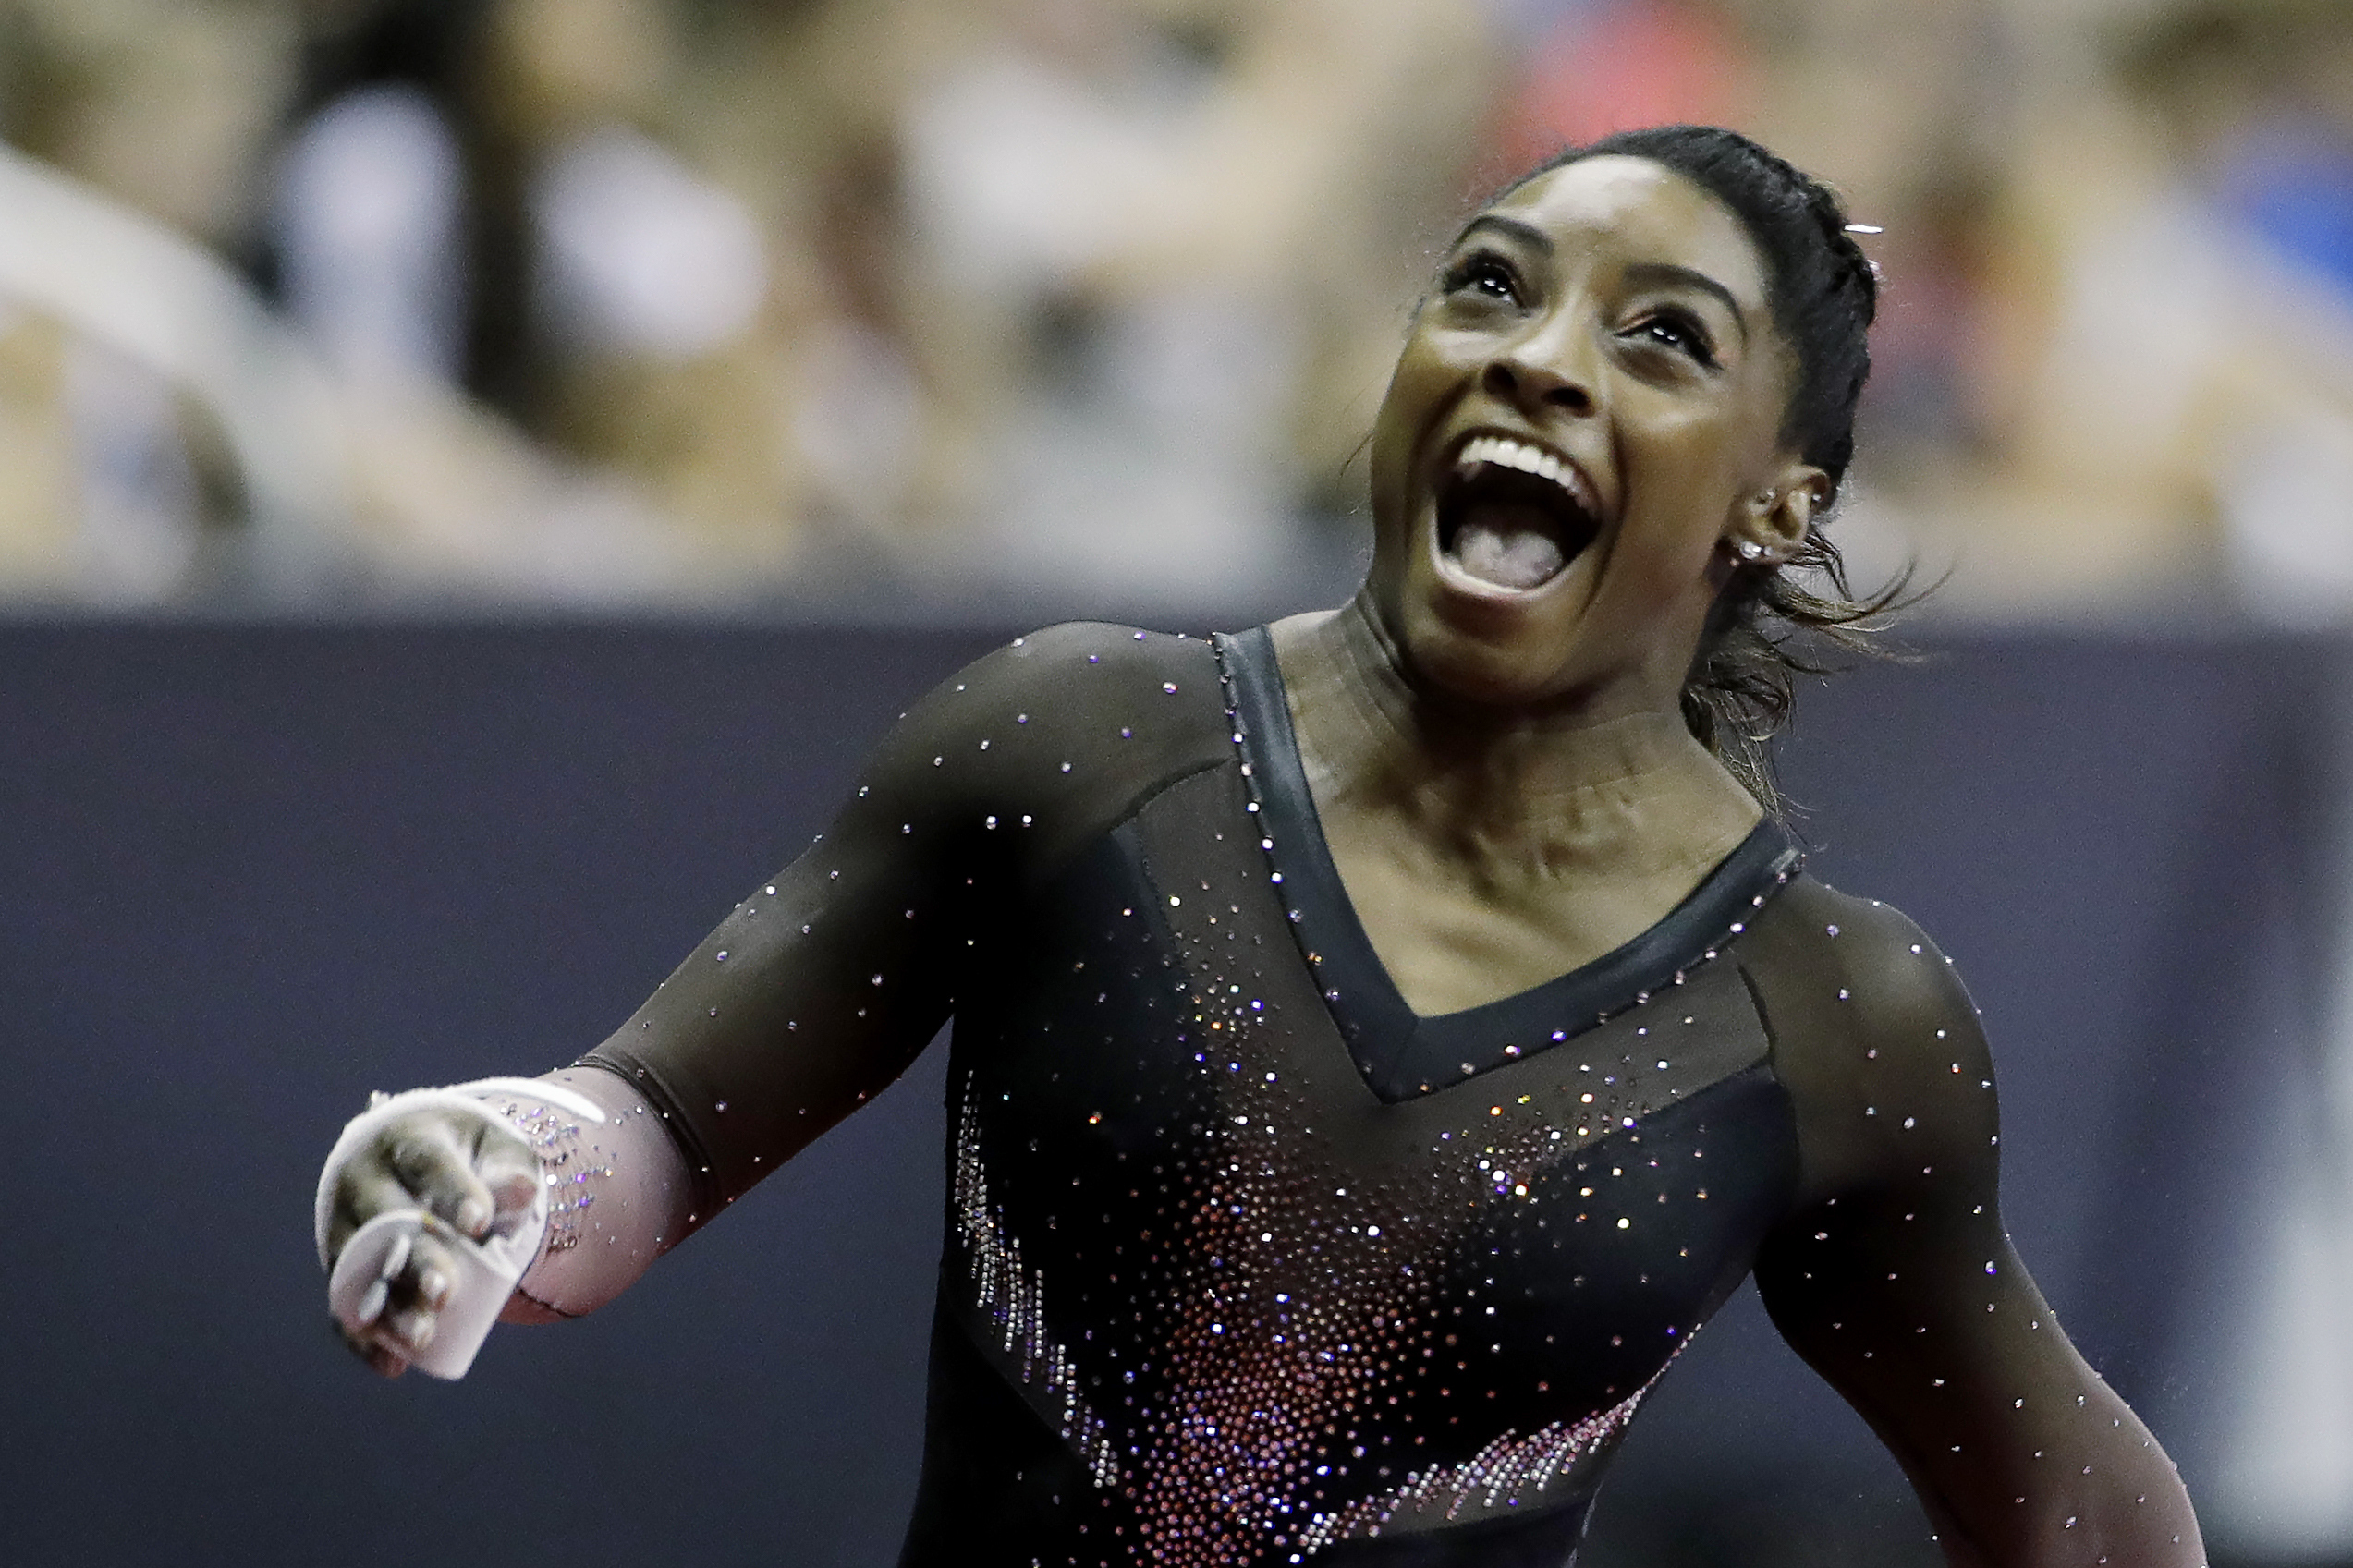 Absolute GOAT Simone Biles Becomes 1st Woman To Land Stupidly Ridiculous Move